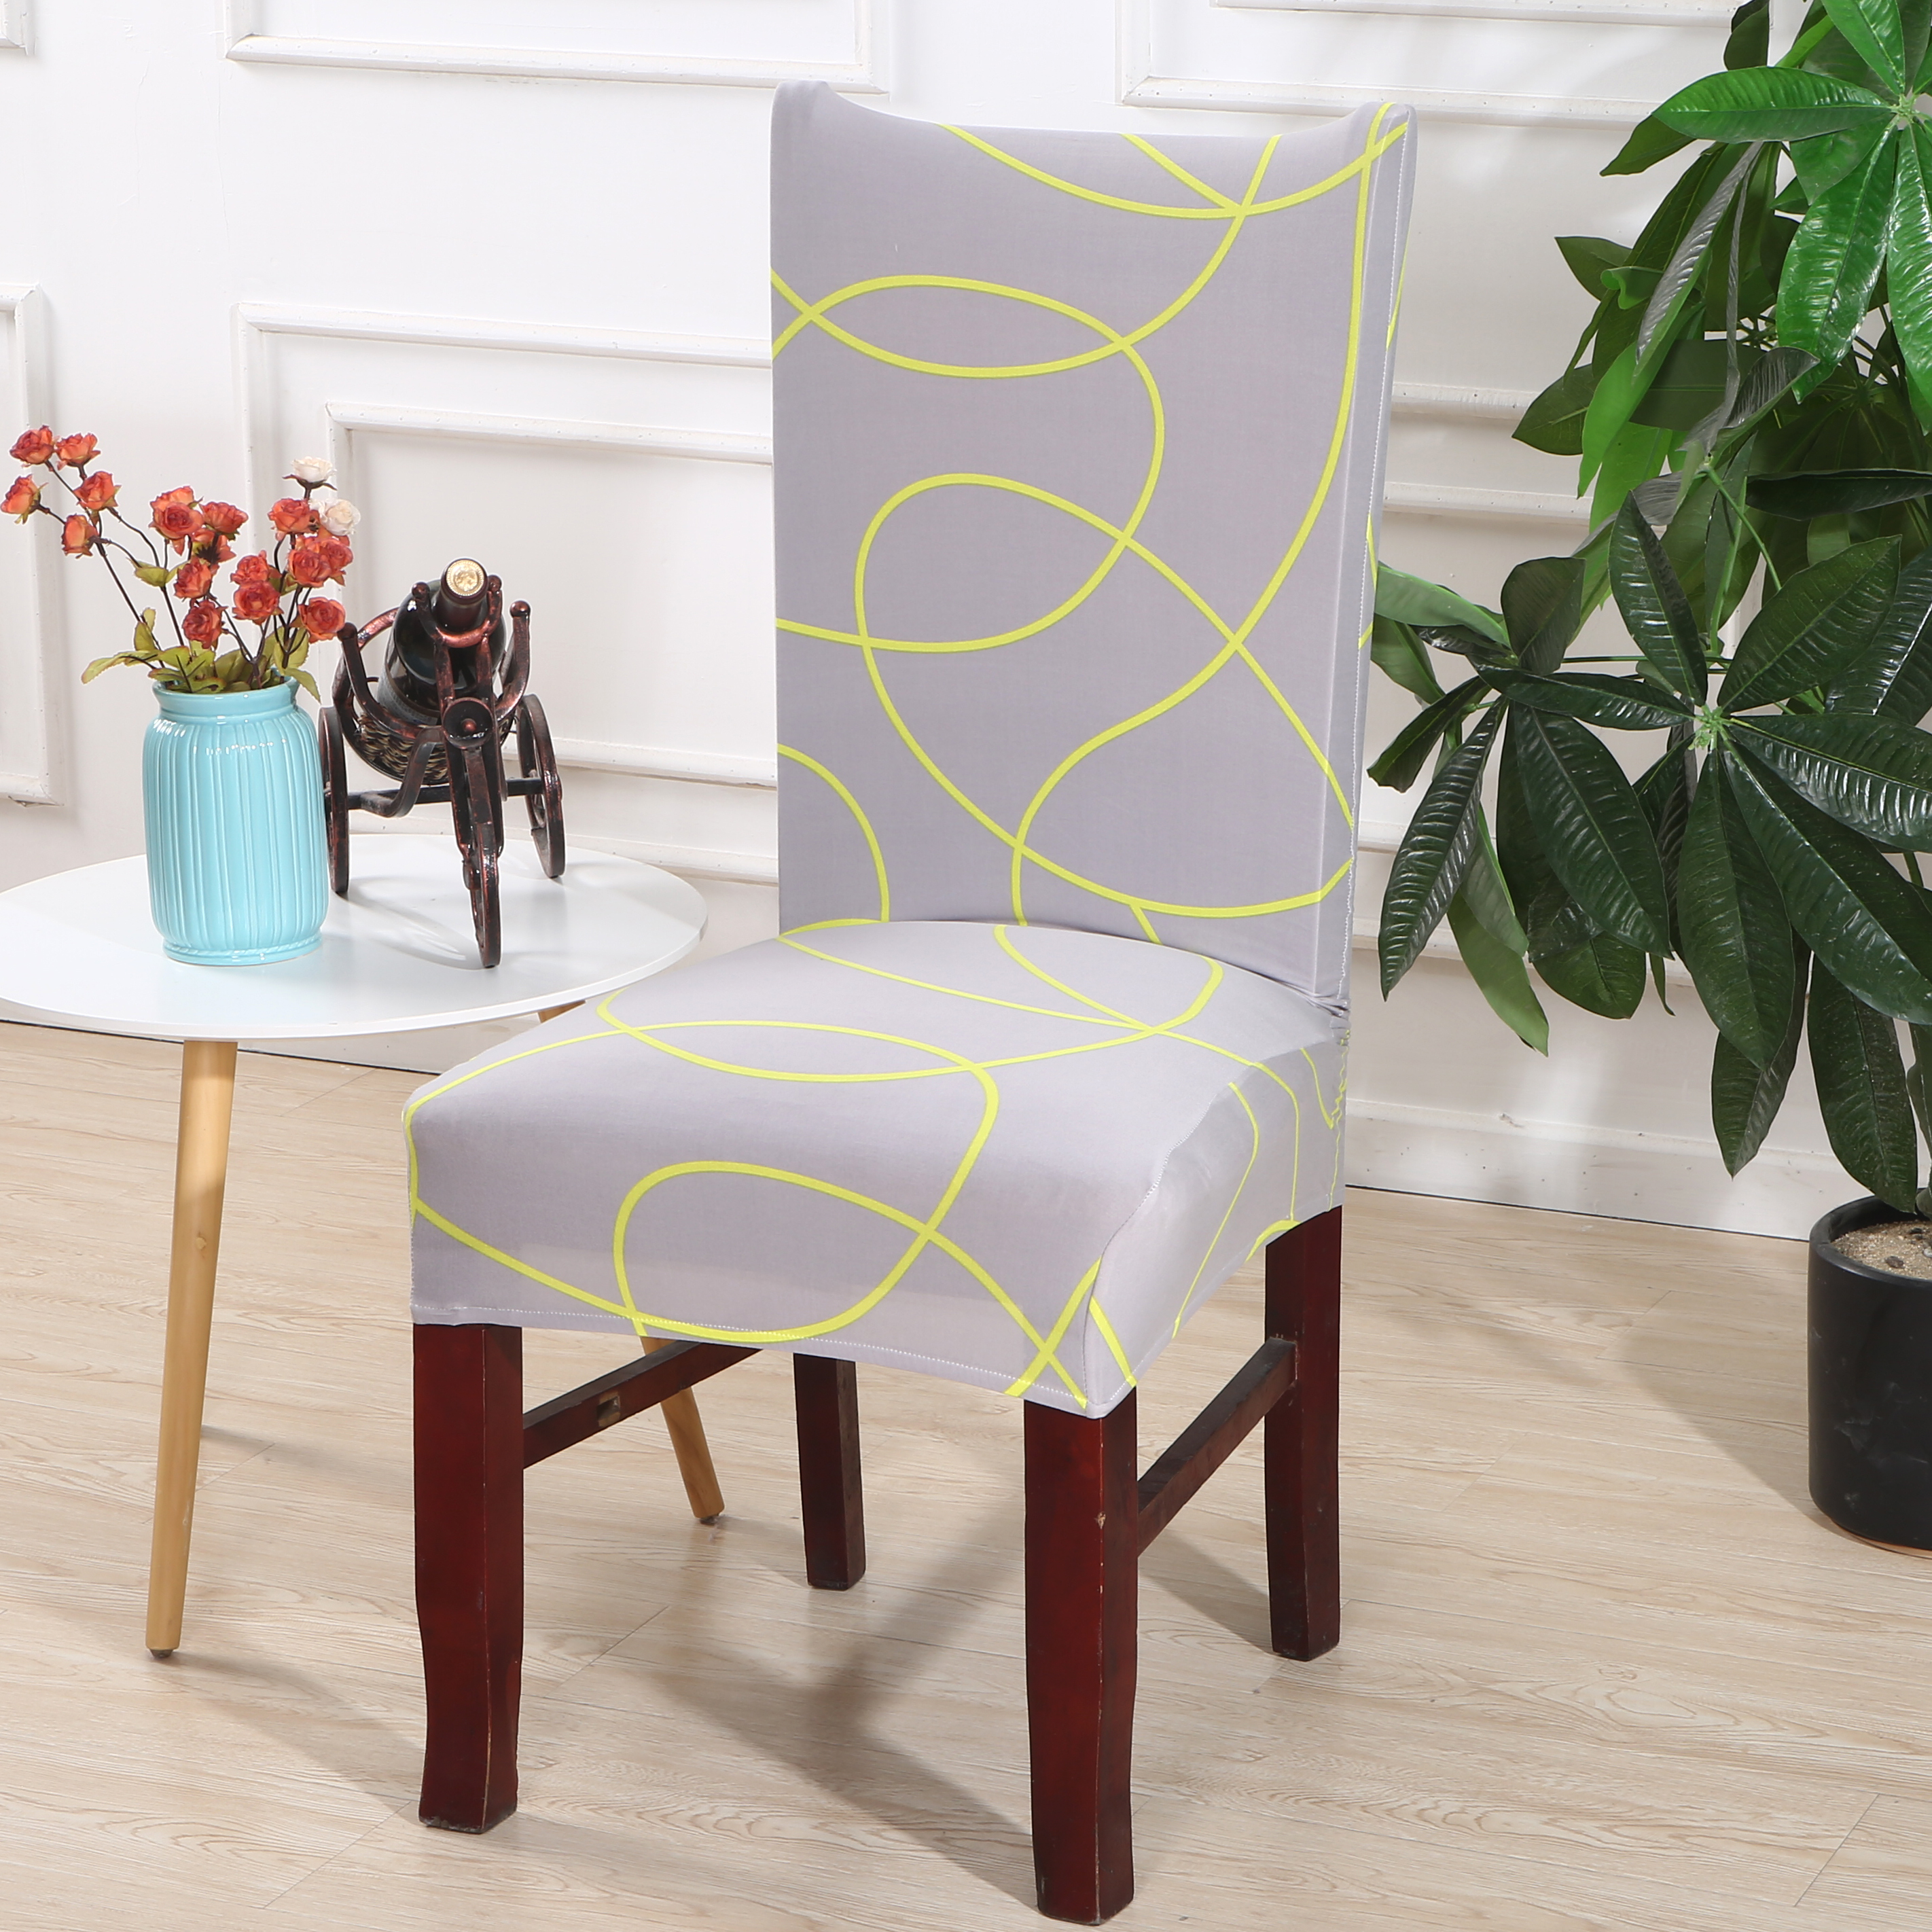 Unique Dining Chair Slipcovers South Africa with Simple Decor